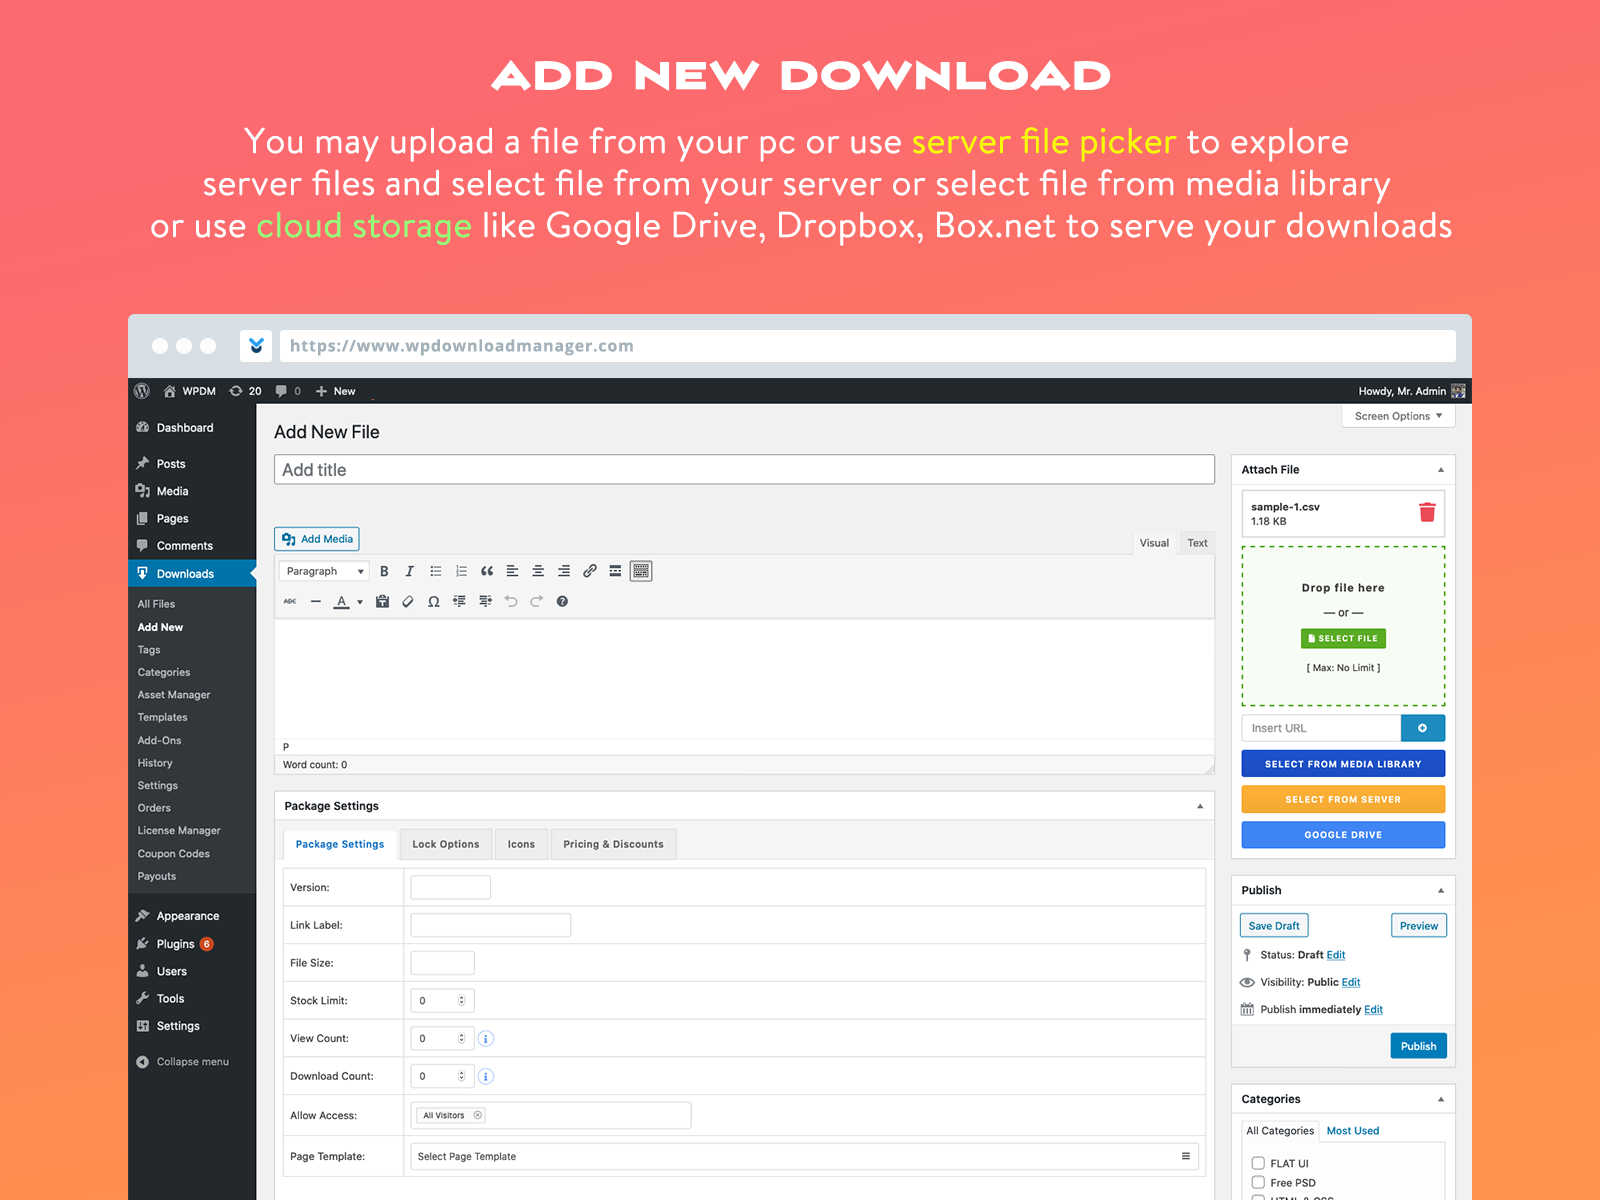 Create new download